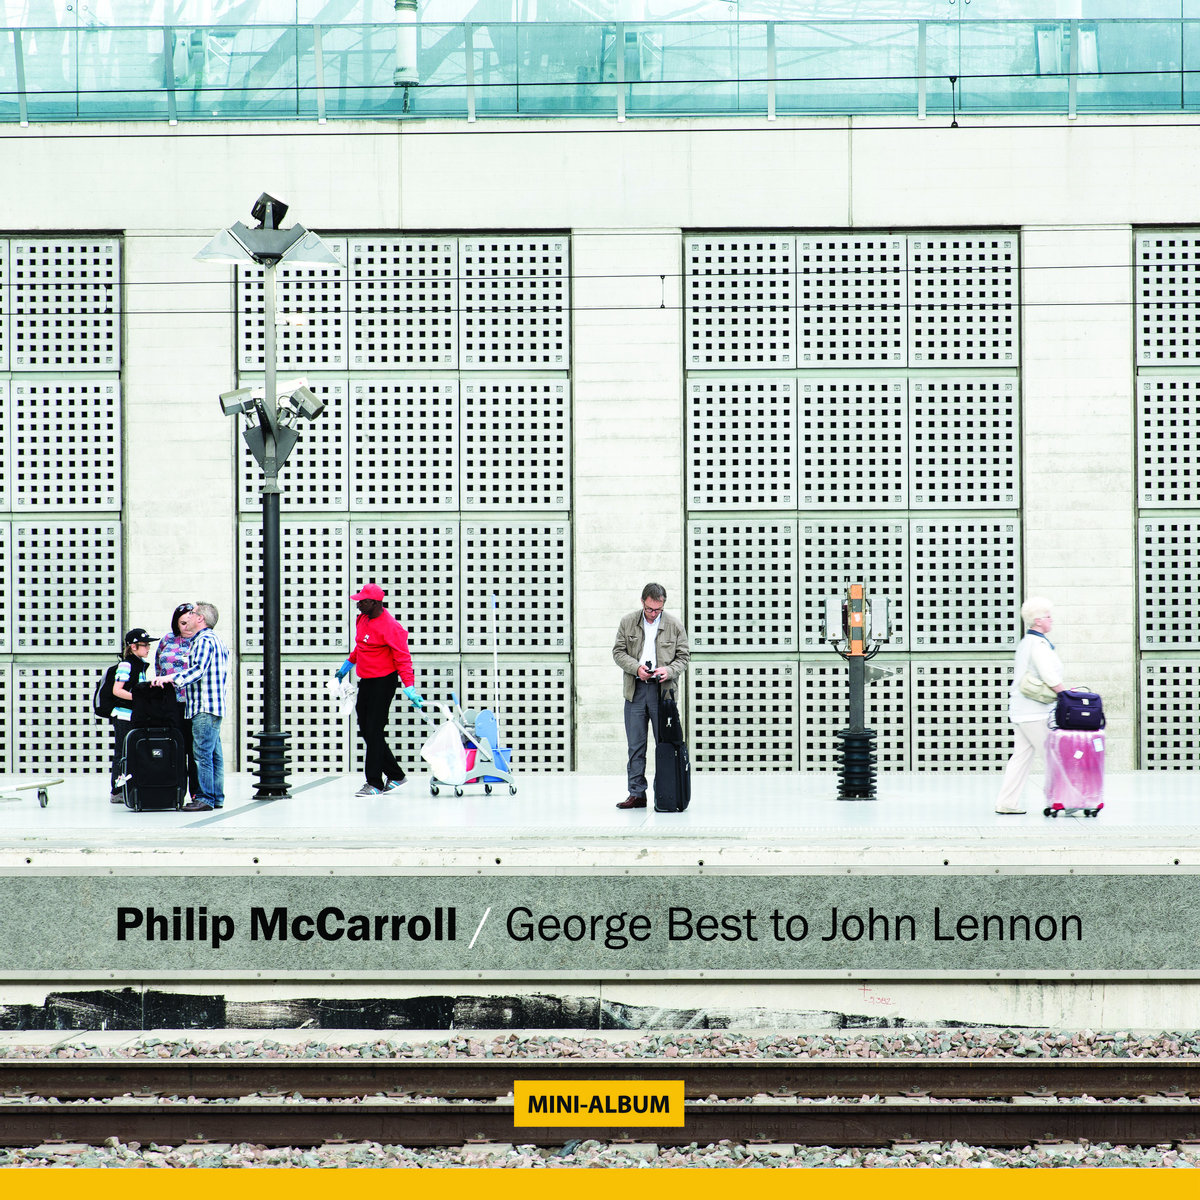 On this day in 2021, @philmccarroll released the EP George Best to John Lennon in a physical format! The former Payola frontman released his 6 track EP/Mini Album on his own through his bandcamp page philipmccarroll.bandcamp.com